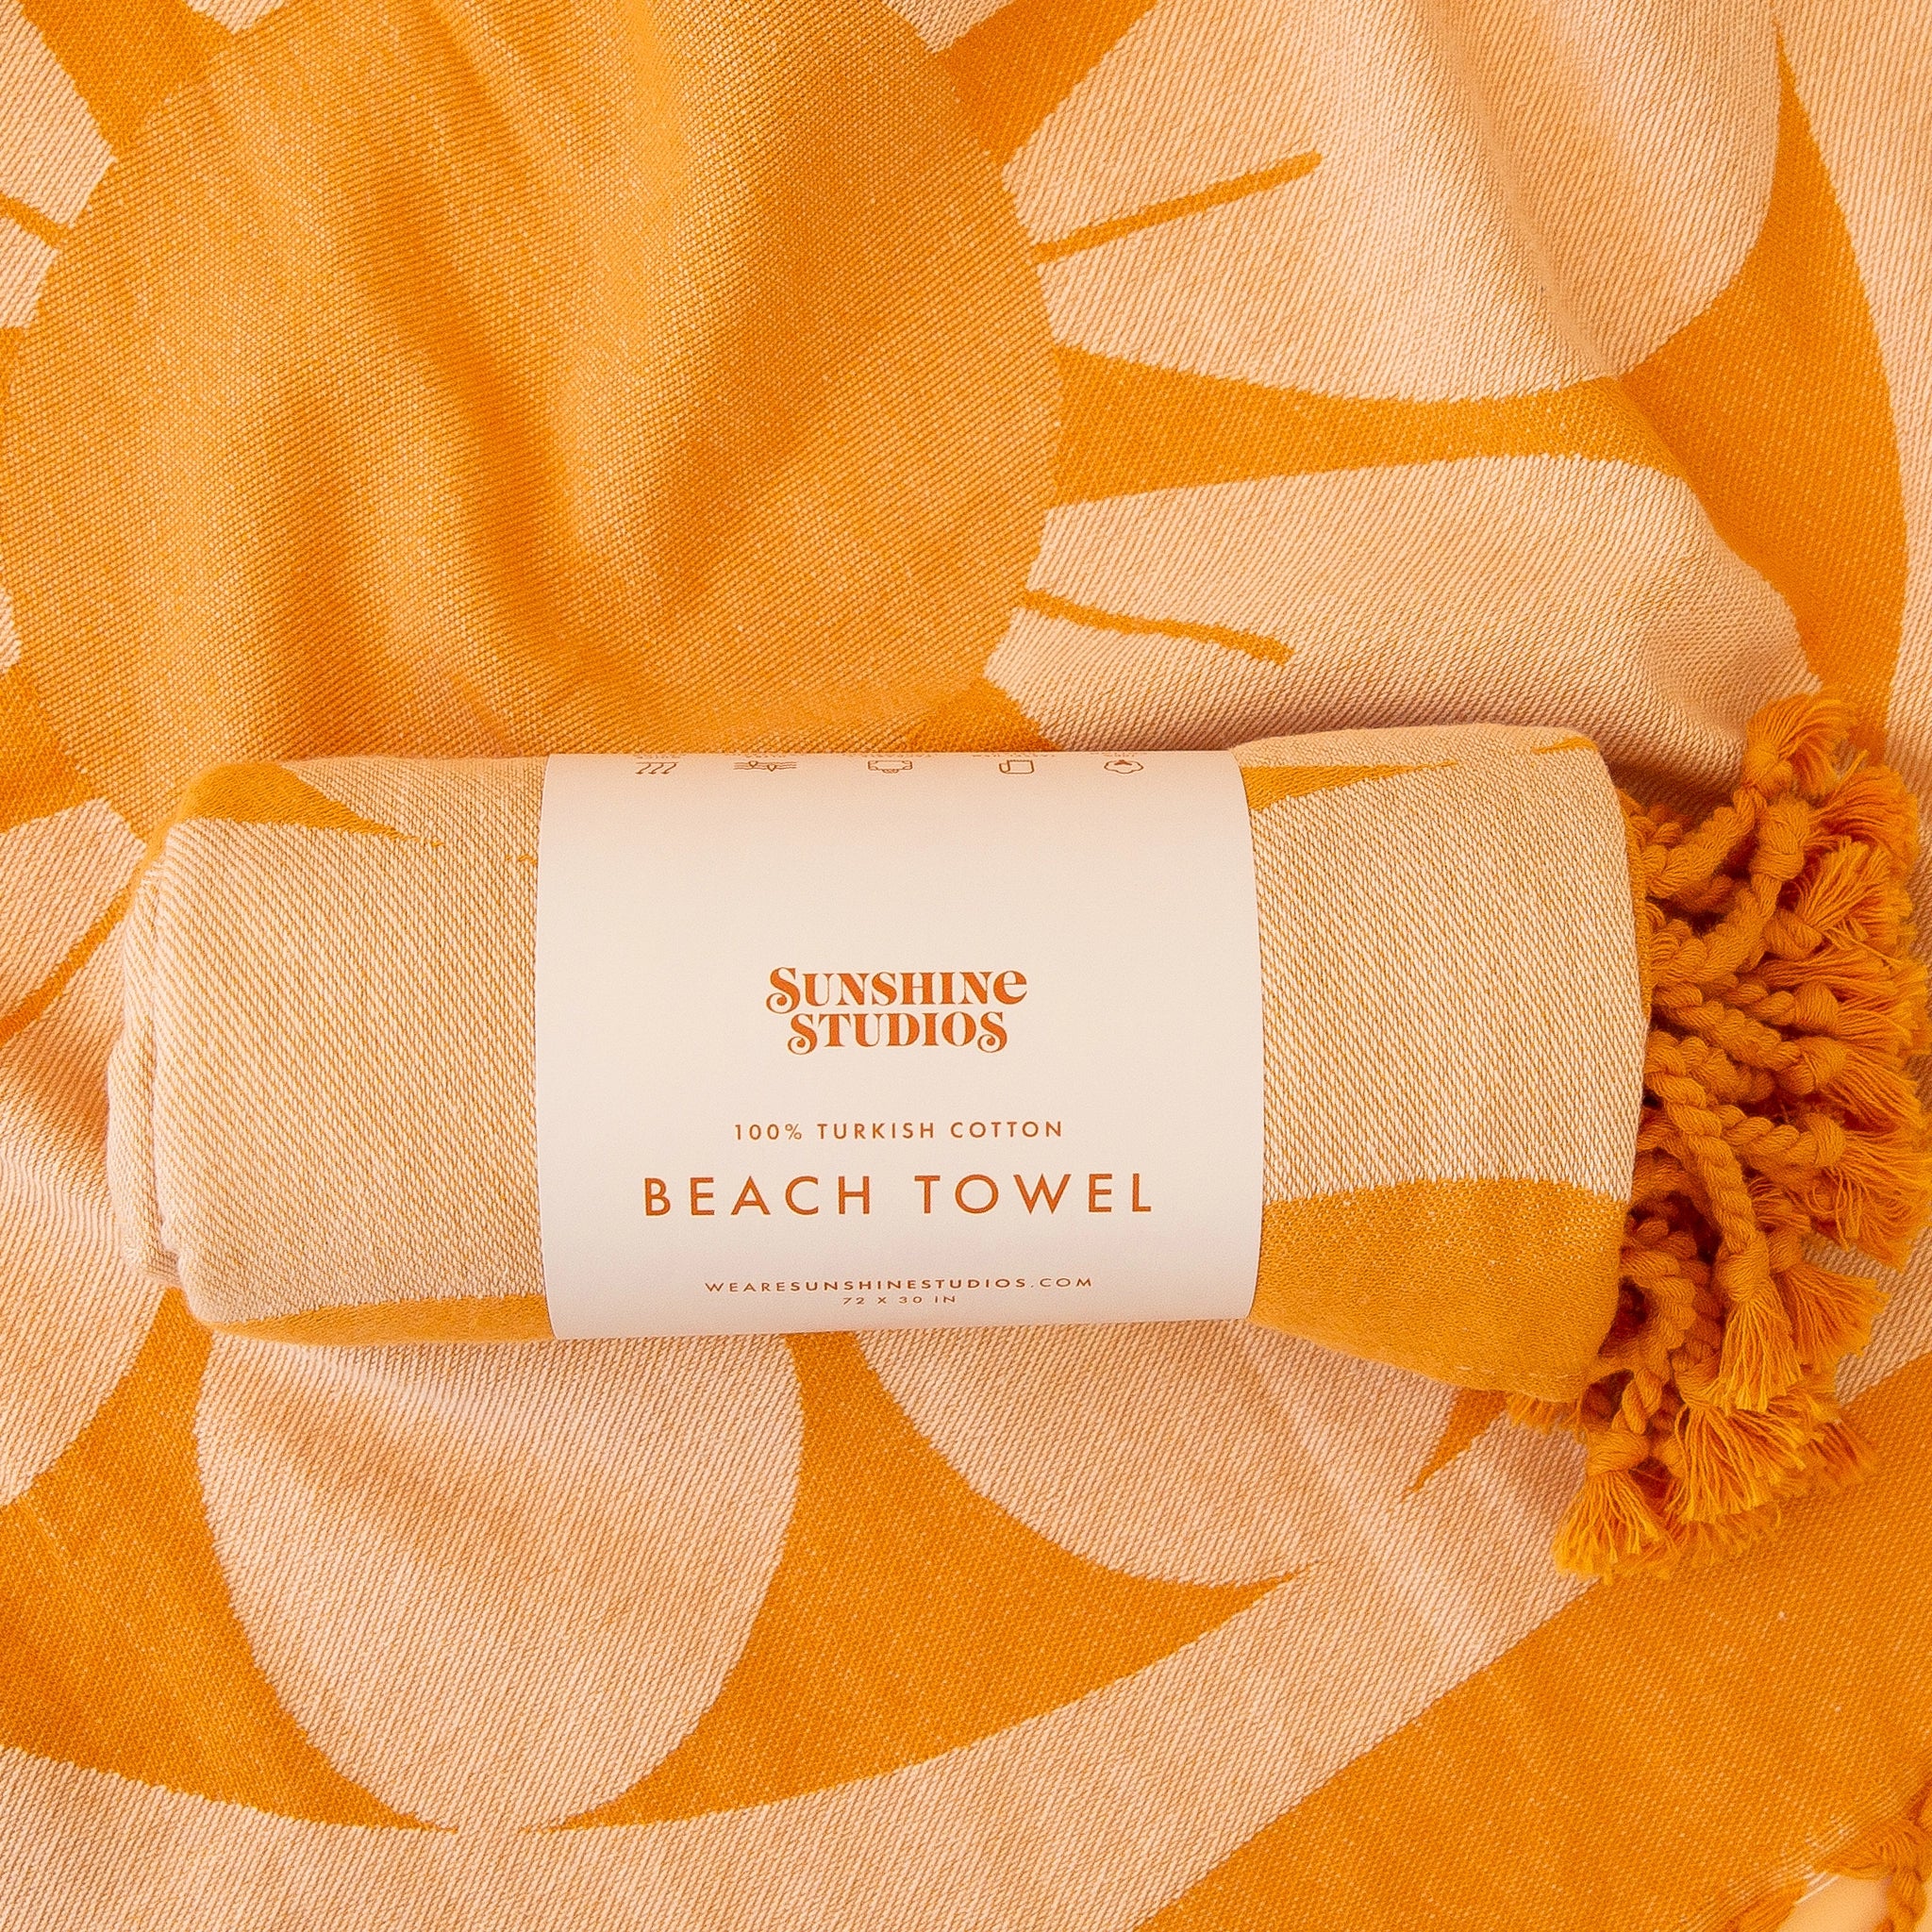 An orange beach towel rolled up with white label that reads, &quot;Sunshine Studios 100% Turkish Cotton Beach Towel&quot; along with a retro flower design and orange string tassels.